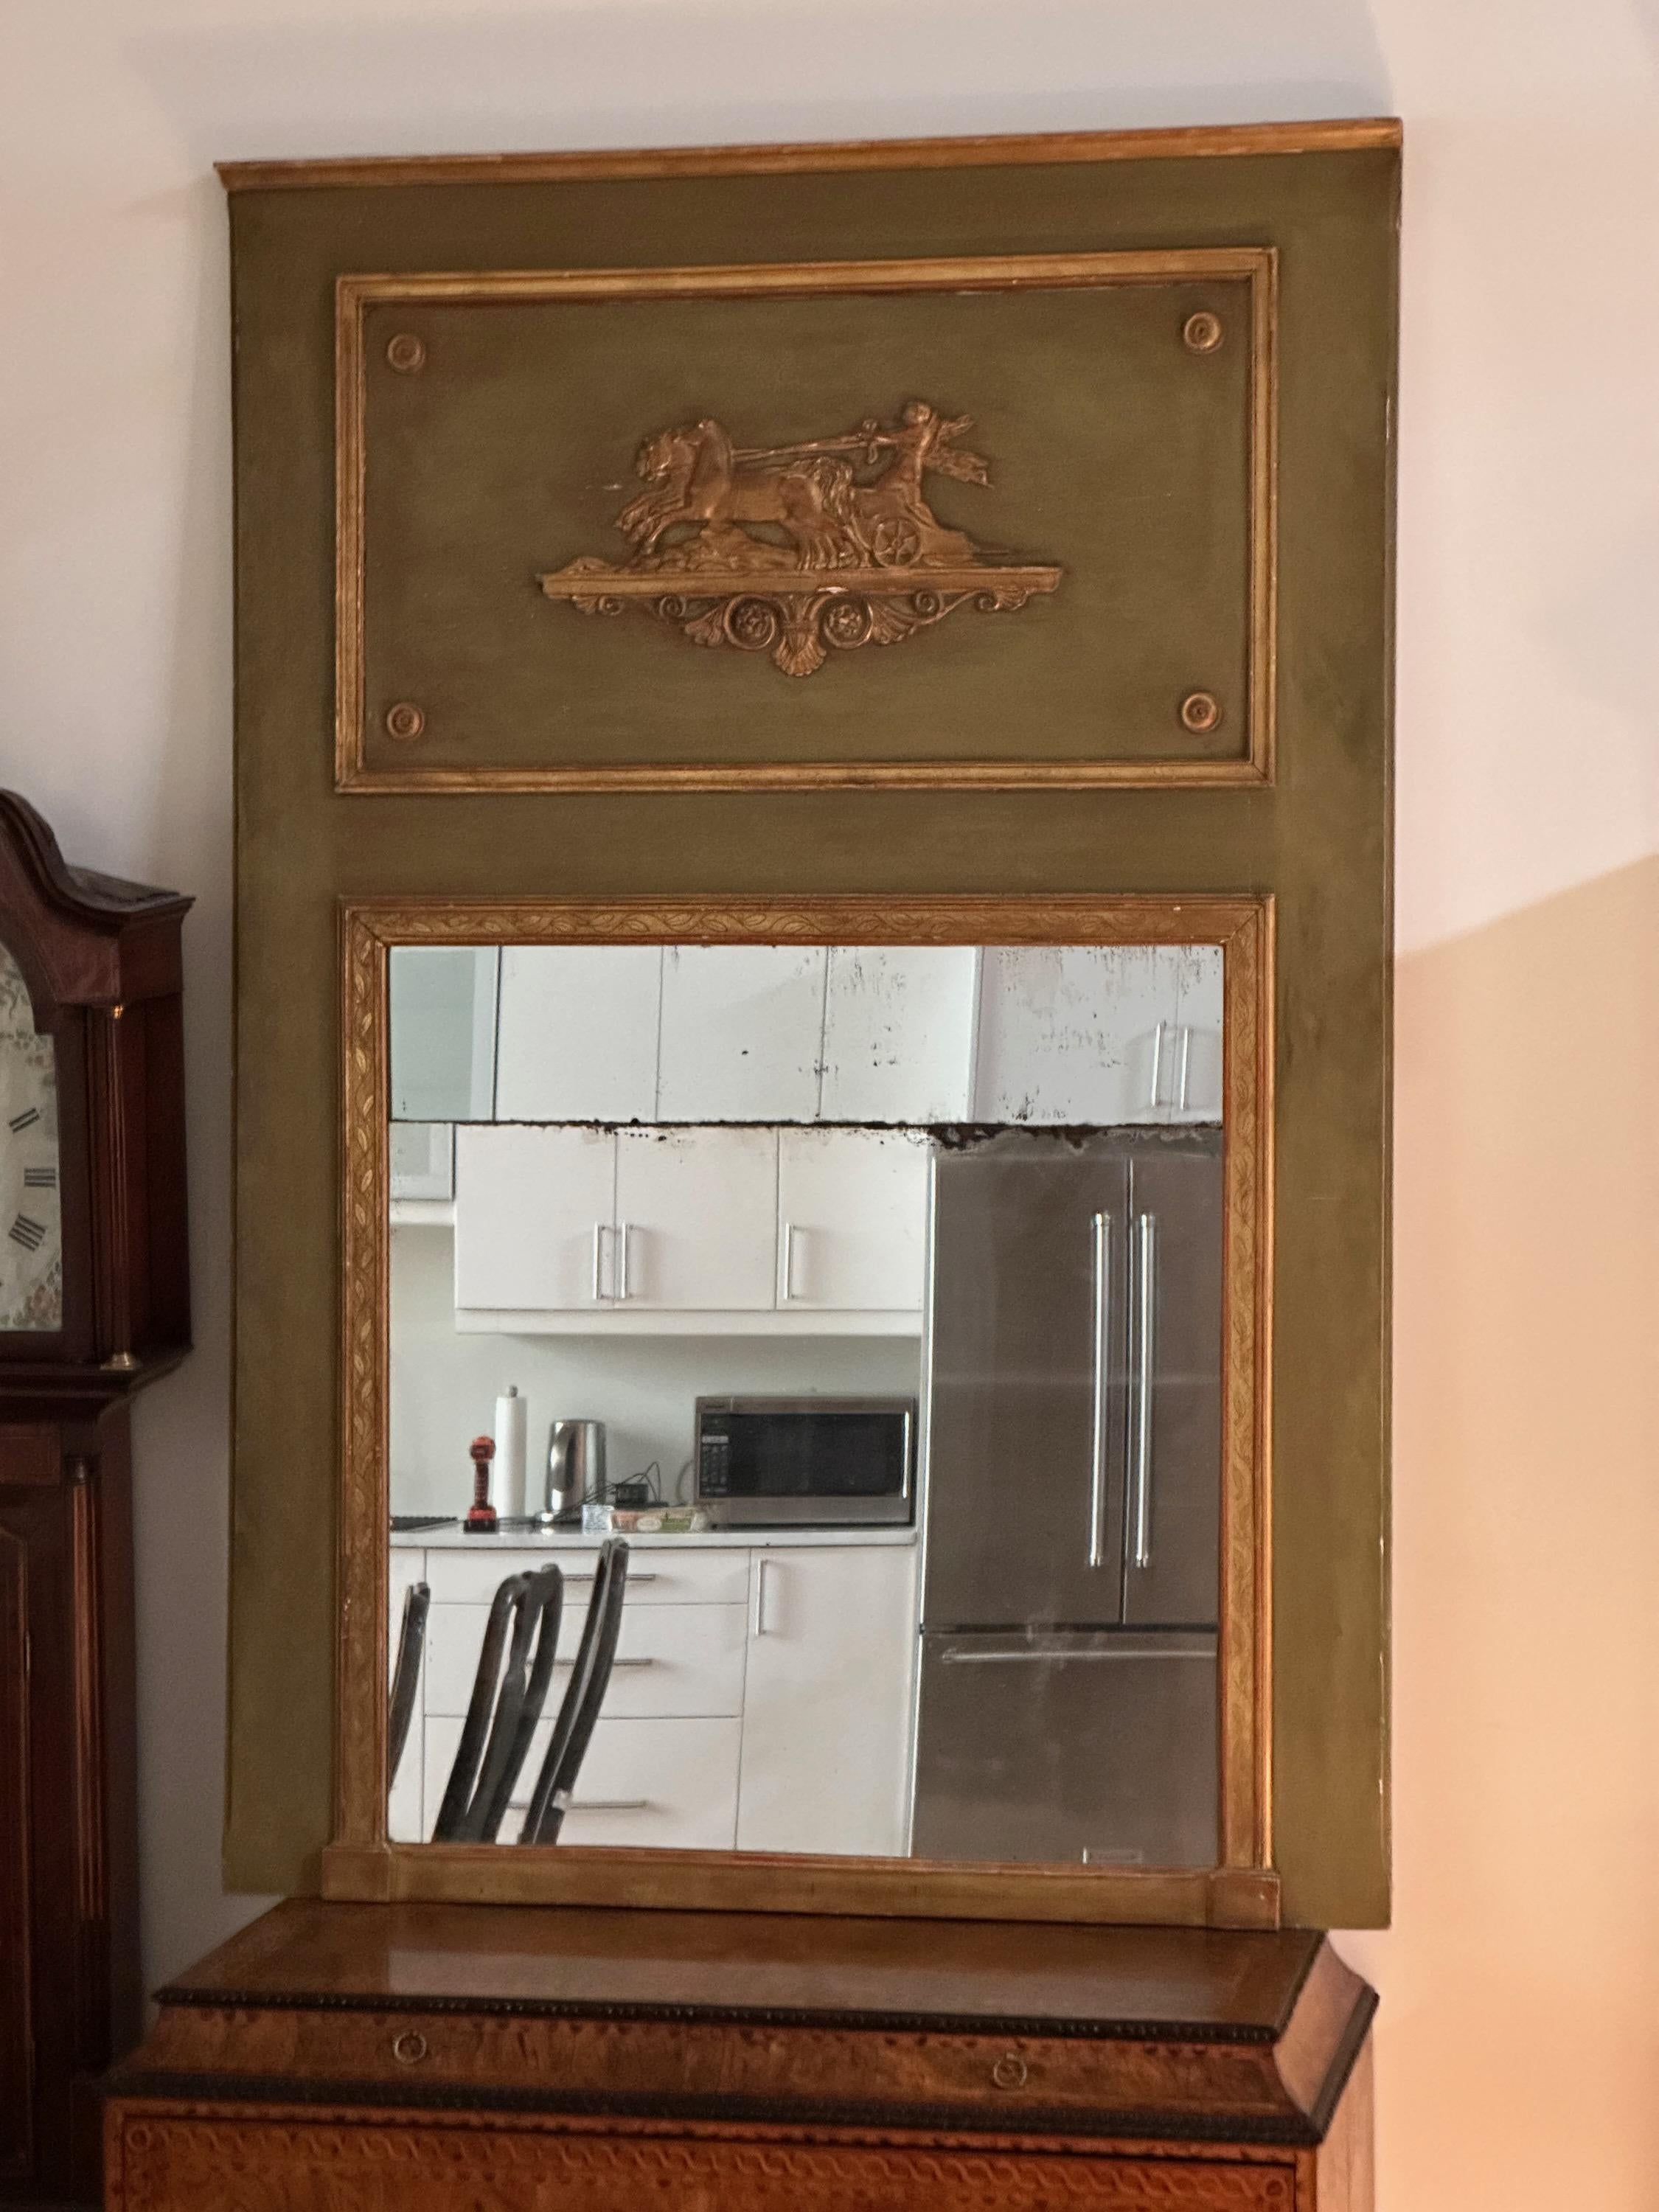 A large and impressive mid-19th C. French moss-green painted and gilt decorated trumeau mirror with carved classical motif and original looking glass.